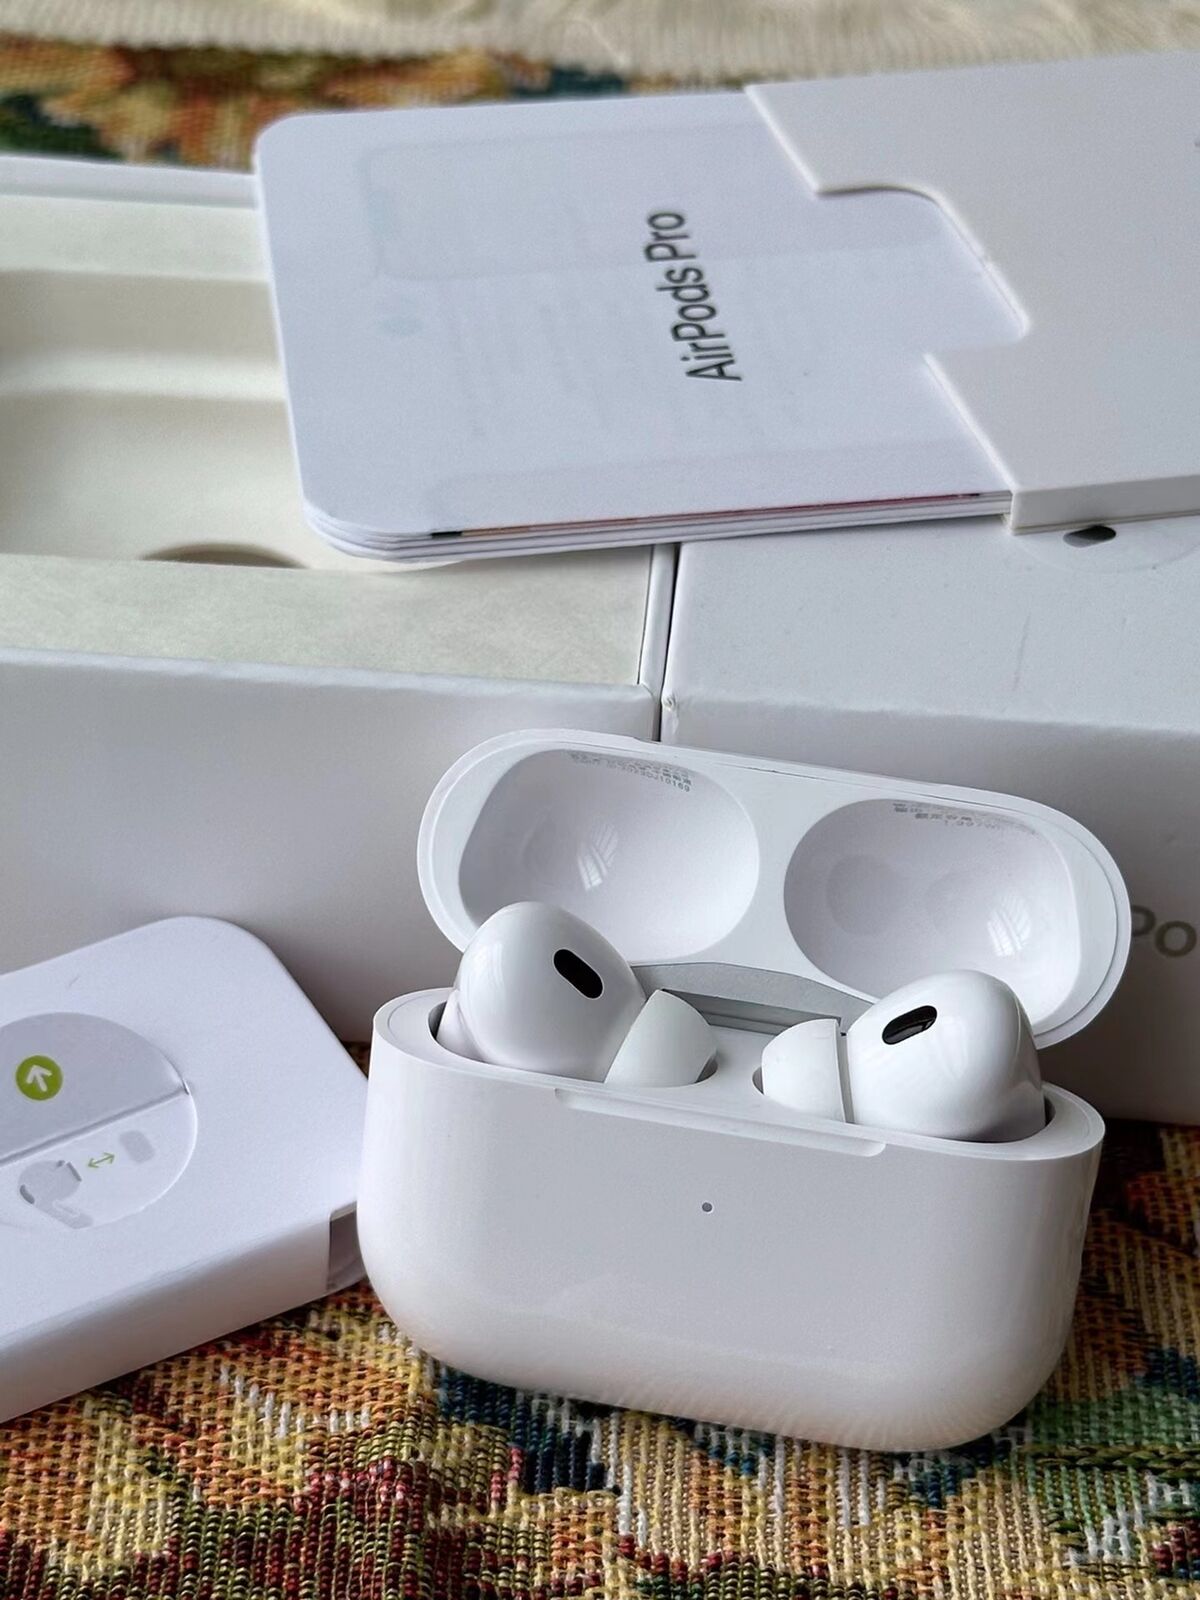 Apple AirPods 2nd Generation Airpods Bluetooth Earbuds Earphone Charging Case🎵